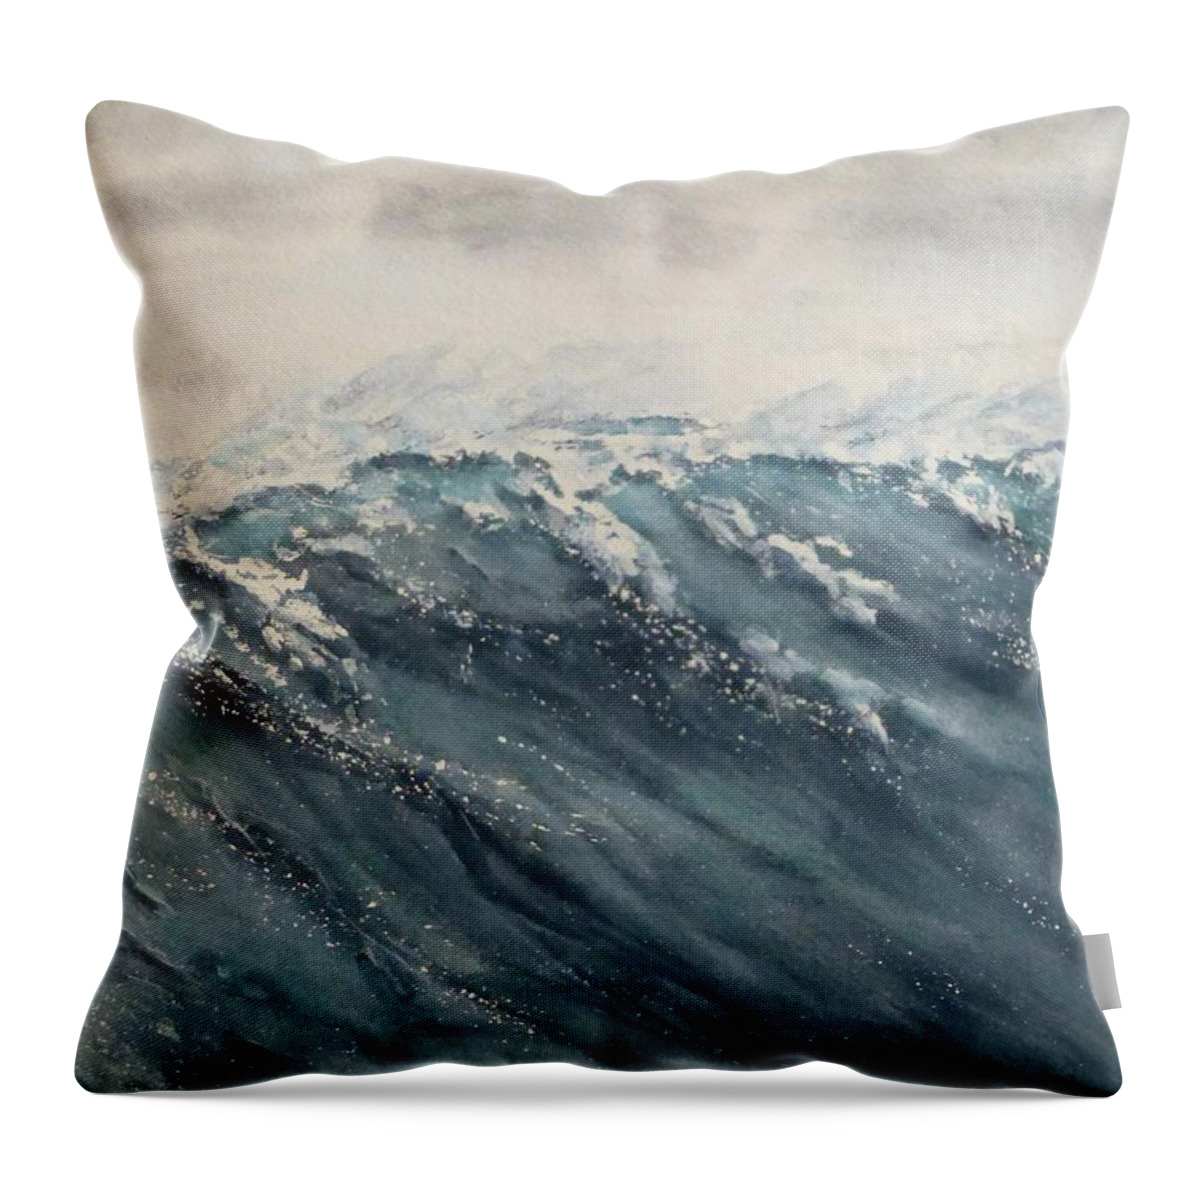 Ocean Throw Pillow featuring the painting Ocean's Wave by Kelly Mills